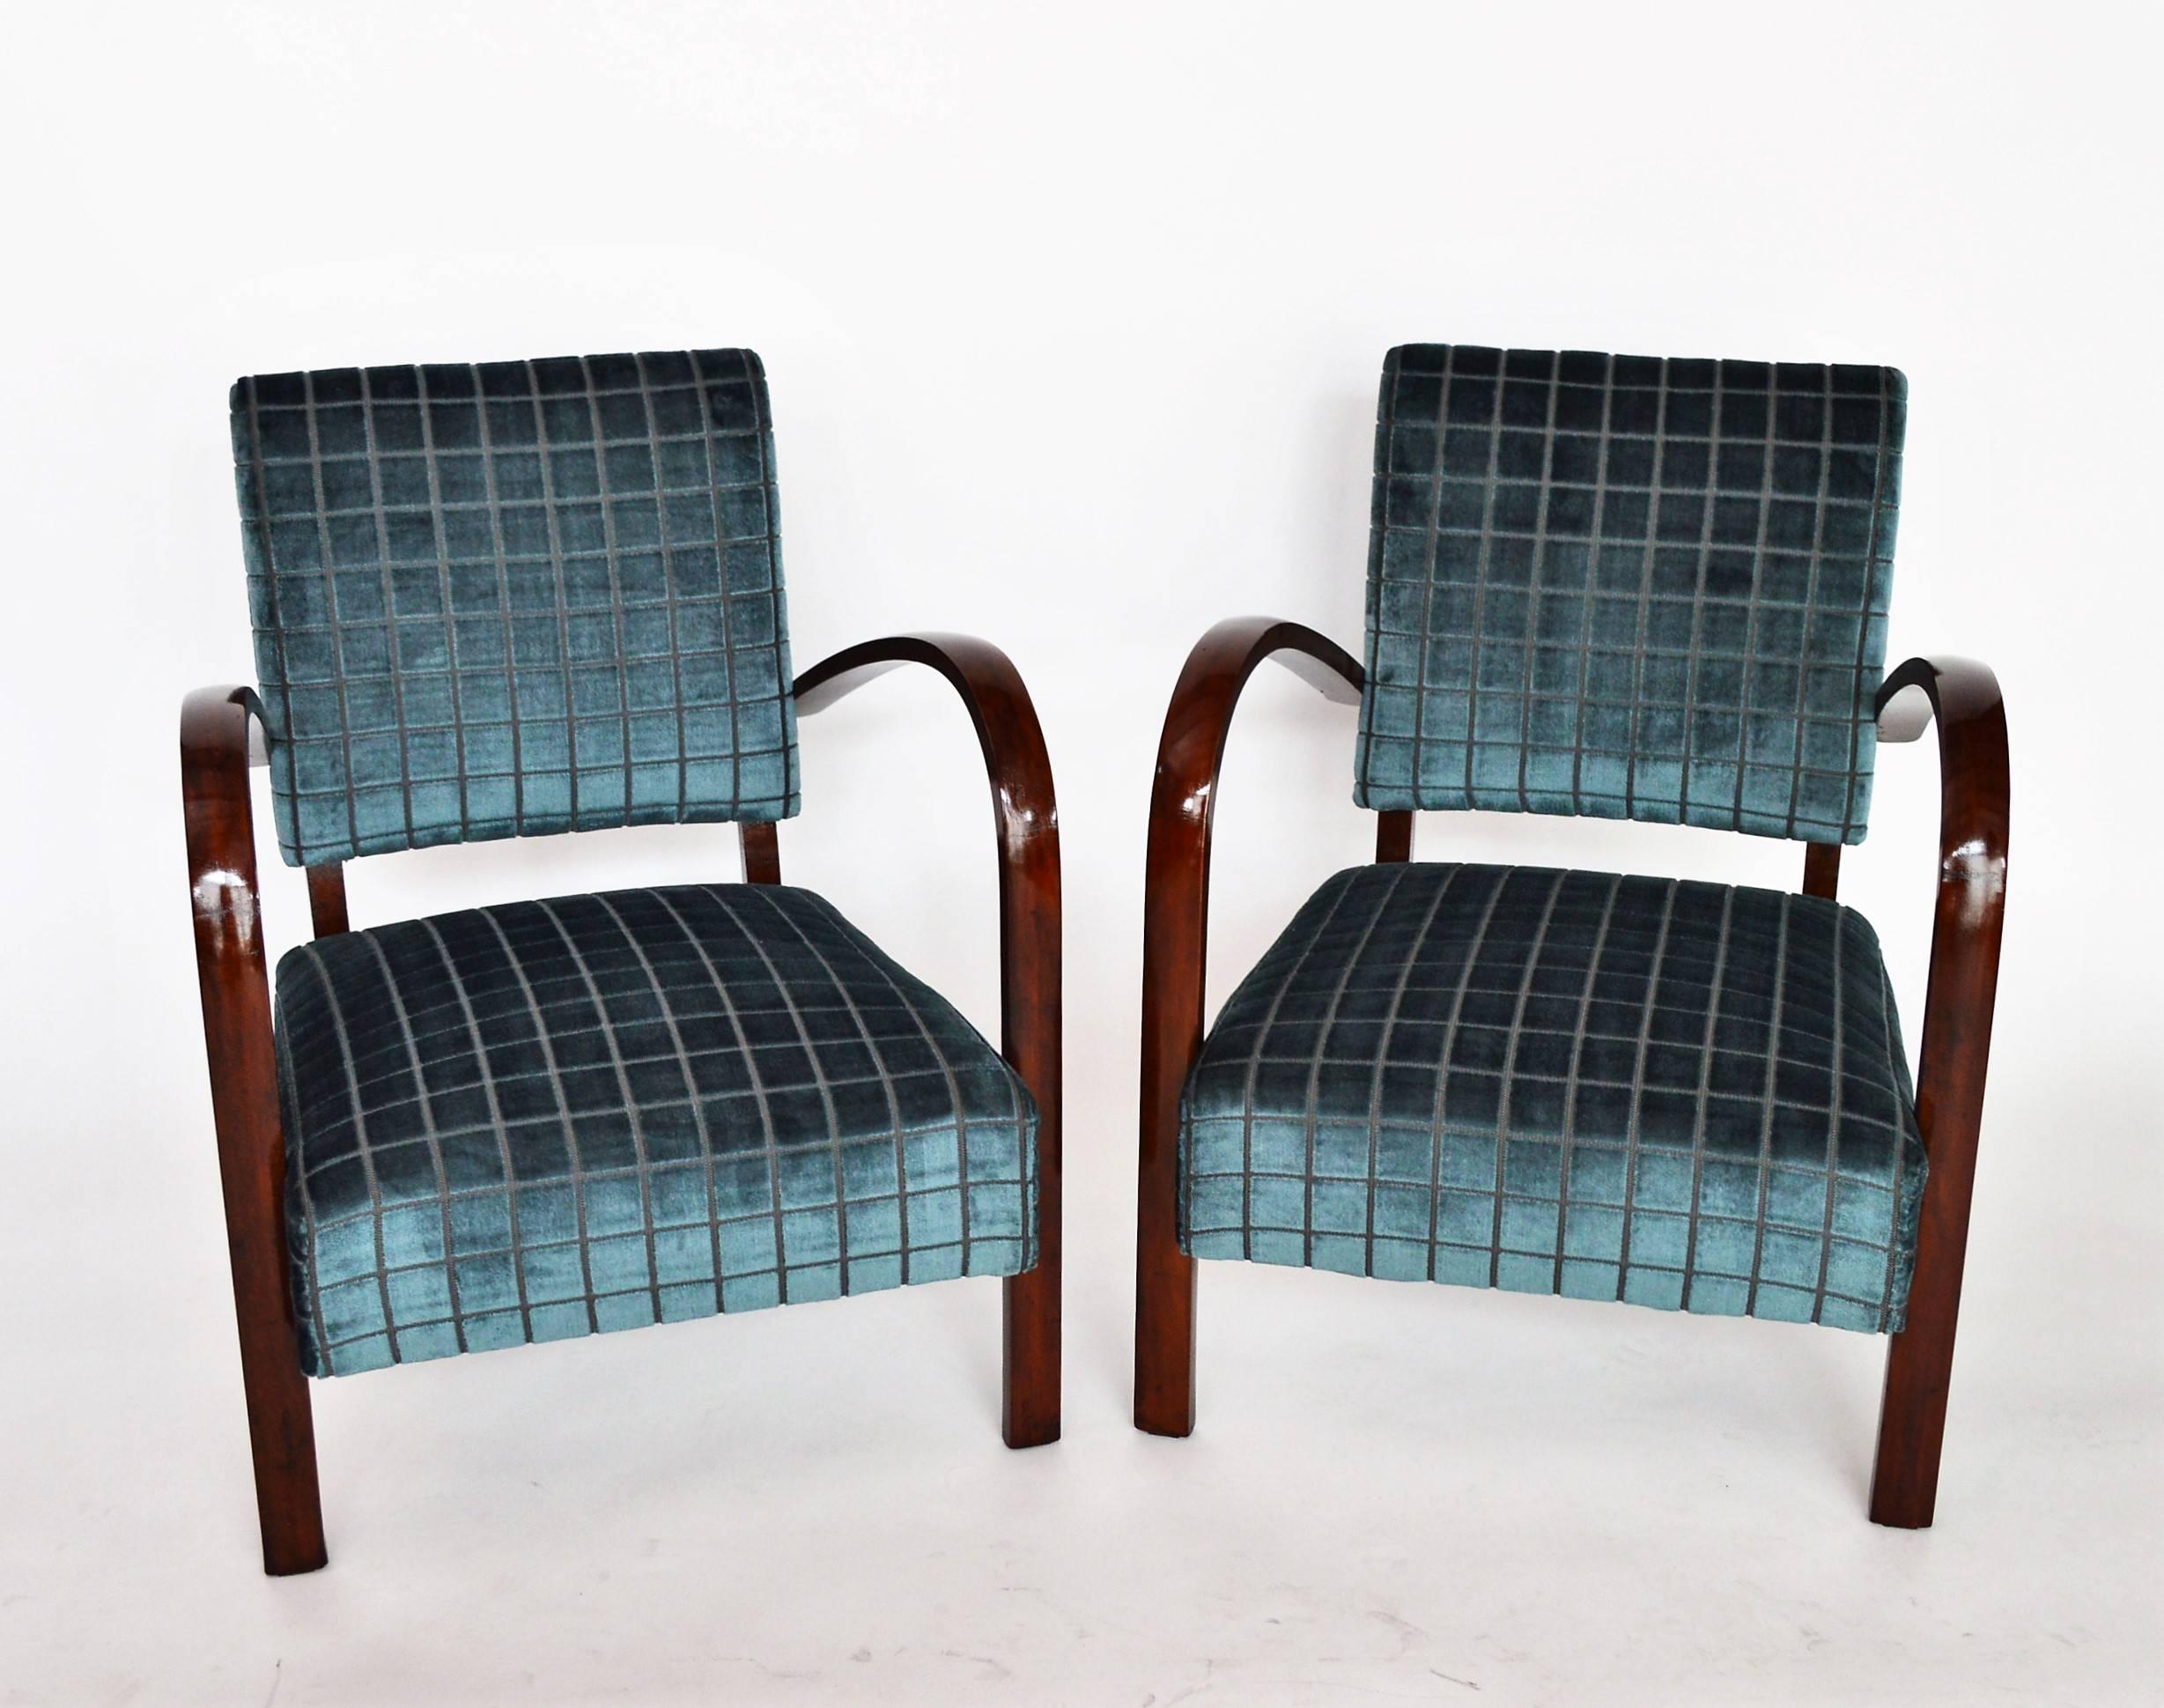 Beautiful pair of two low armchairs with curved armrests in beech wood.
Made in Italy in the 1940s.
The beech wood have been walnut stained to become darker, both chairs have been completely restored and re-upholstered with elegant and soft velvet